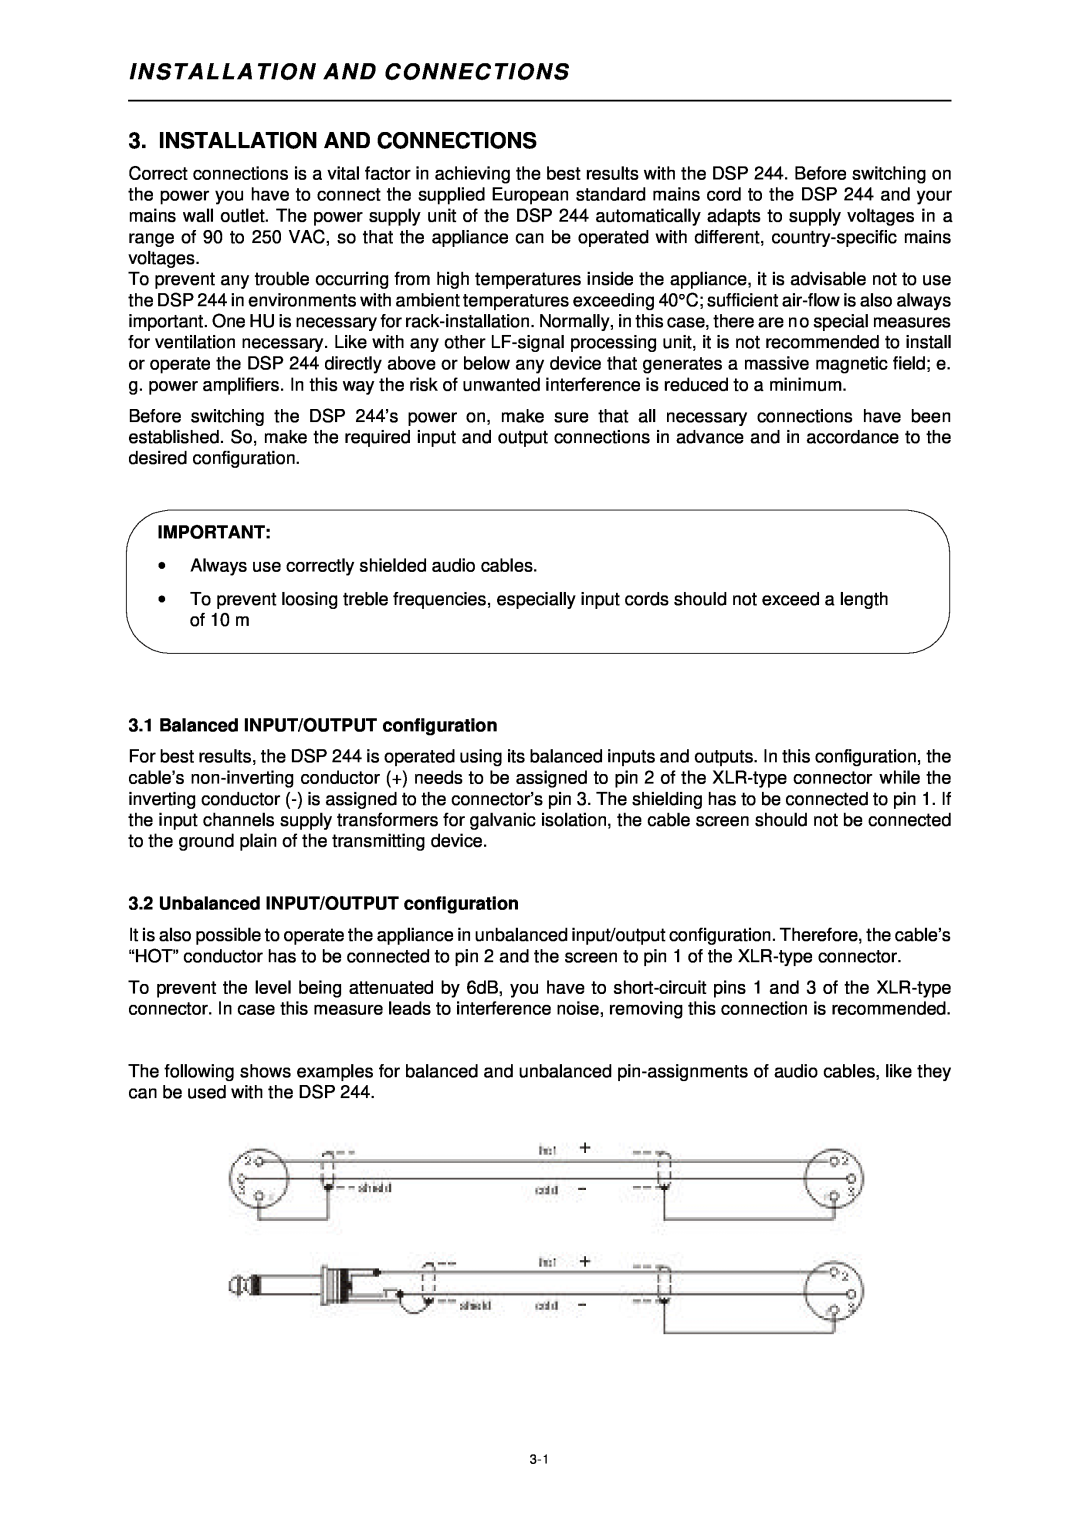 Dynacord DSP 244 owner manual Installation And Connections, 3.1Balanced INPUT/OUTPUT configuration 